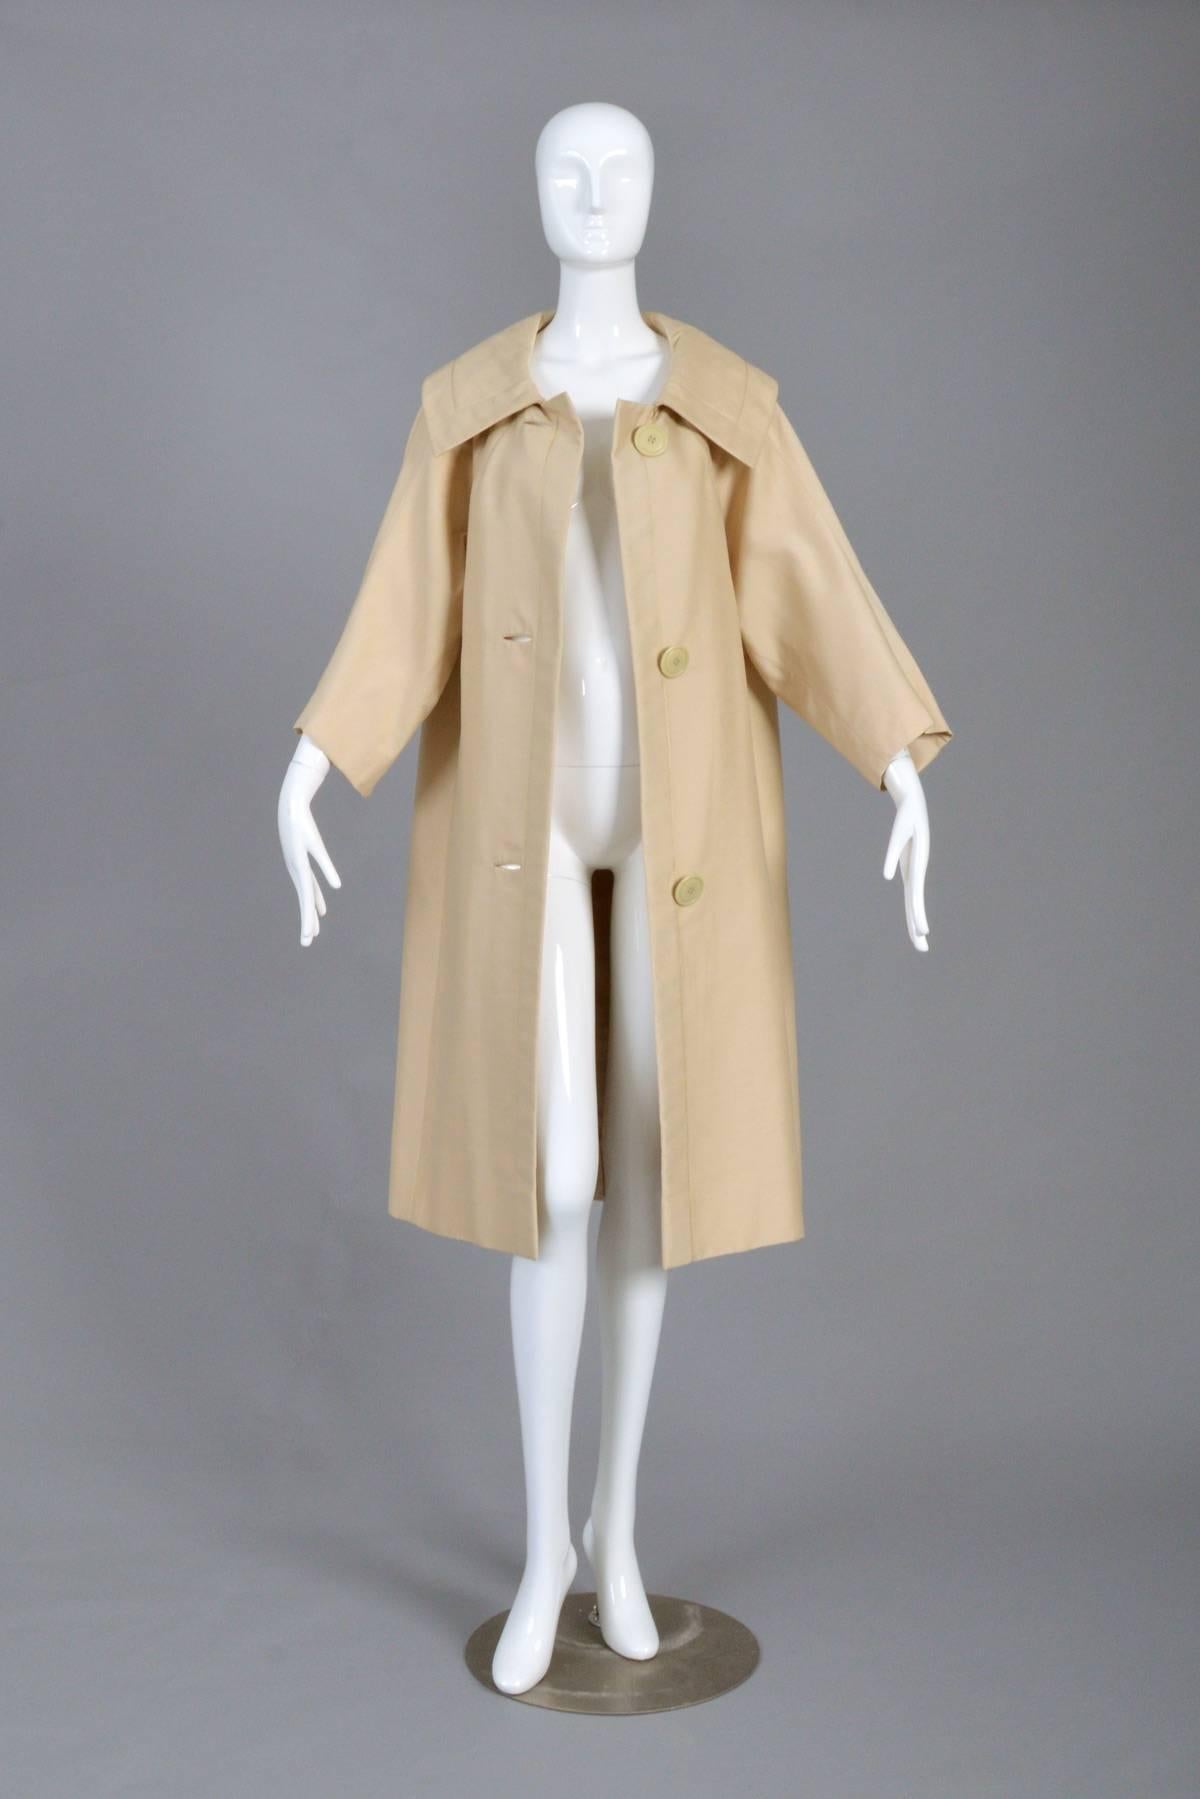 Stunning vintage 1950s silk coat by Christian Dior for Christian Dior Originals, NY. Light oatmeal colored raw silk (Color is slightly off in photos. Photo of the label is closest to actual color). Oversized buttons. Incredible topstitched details,